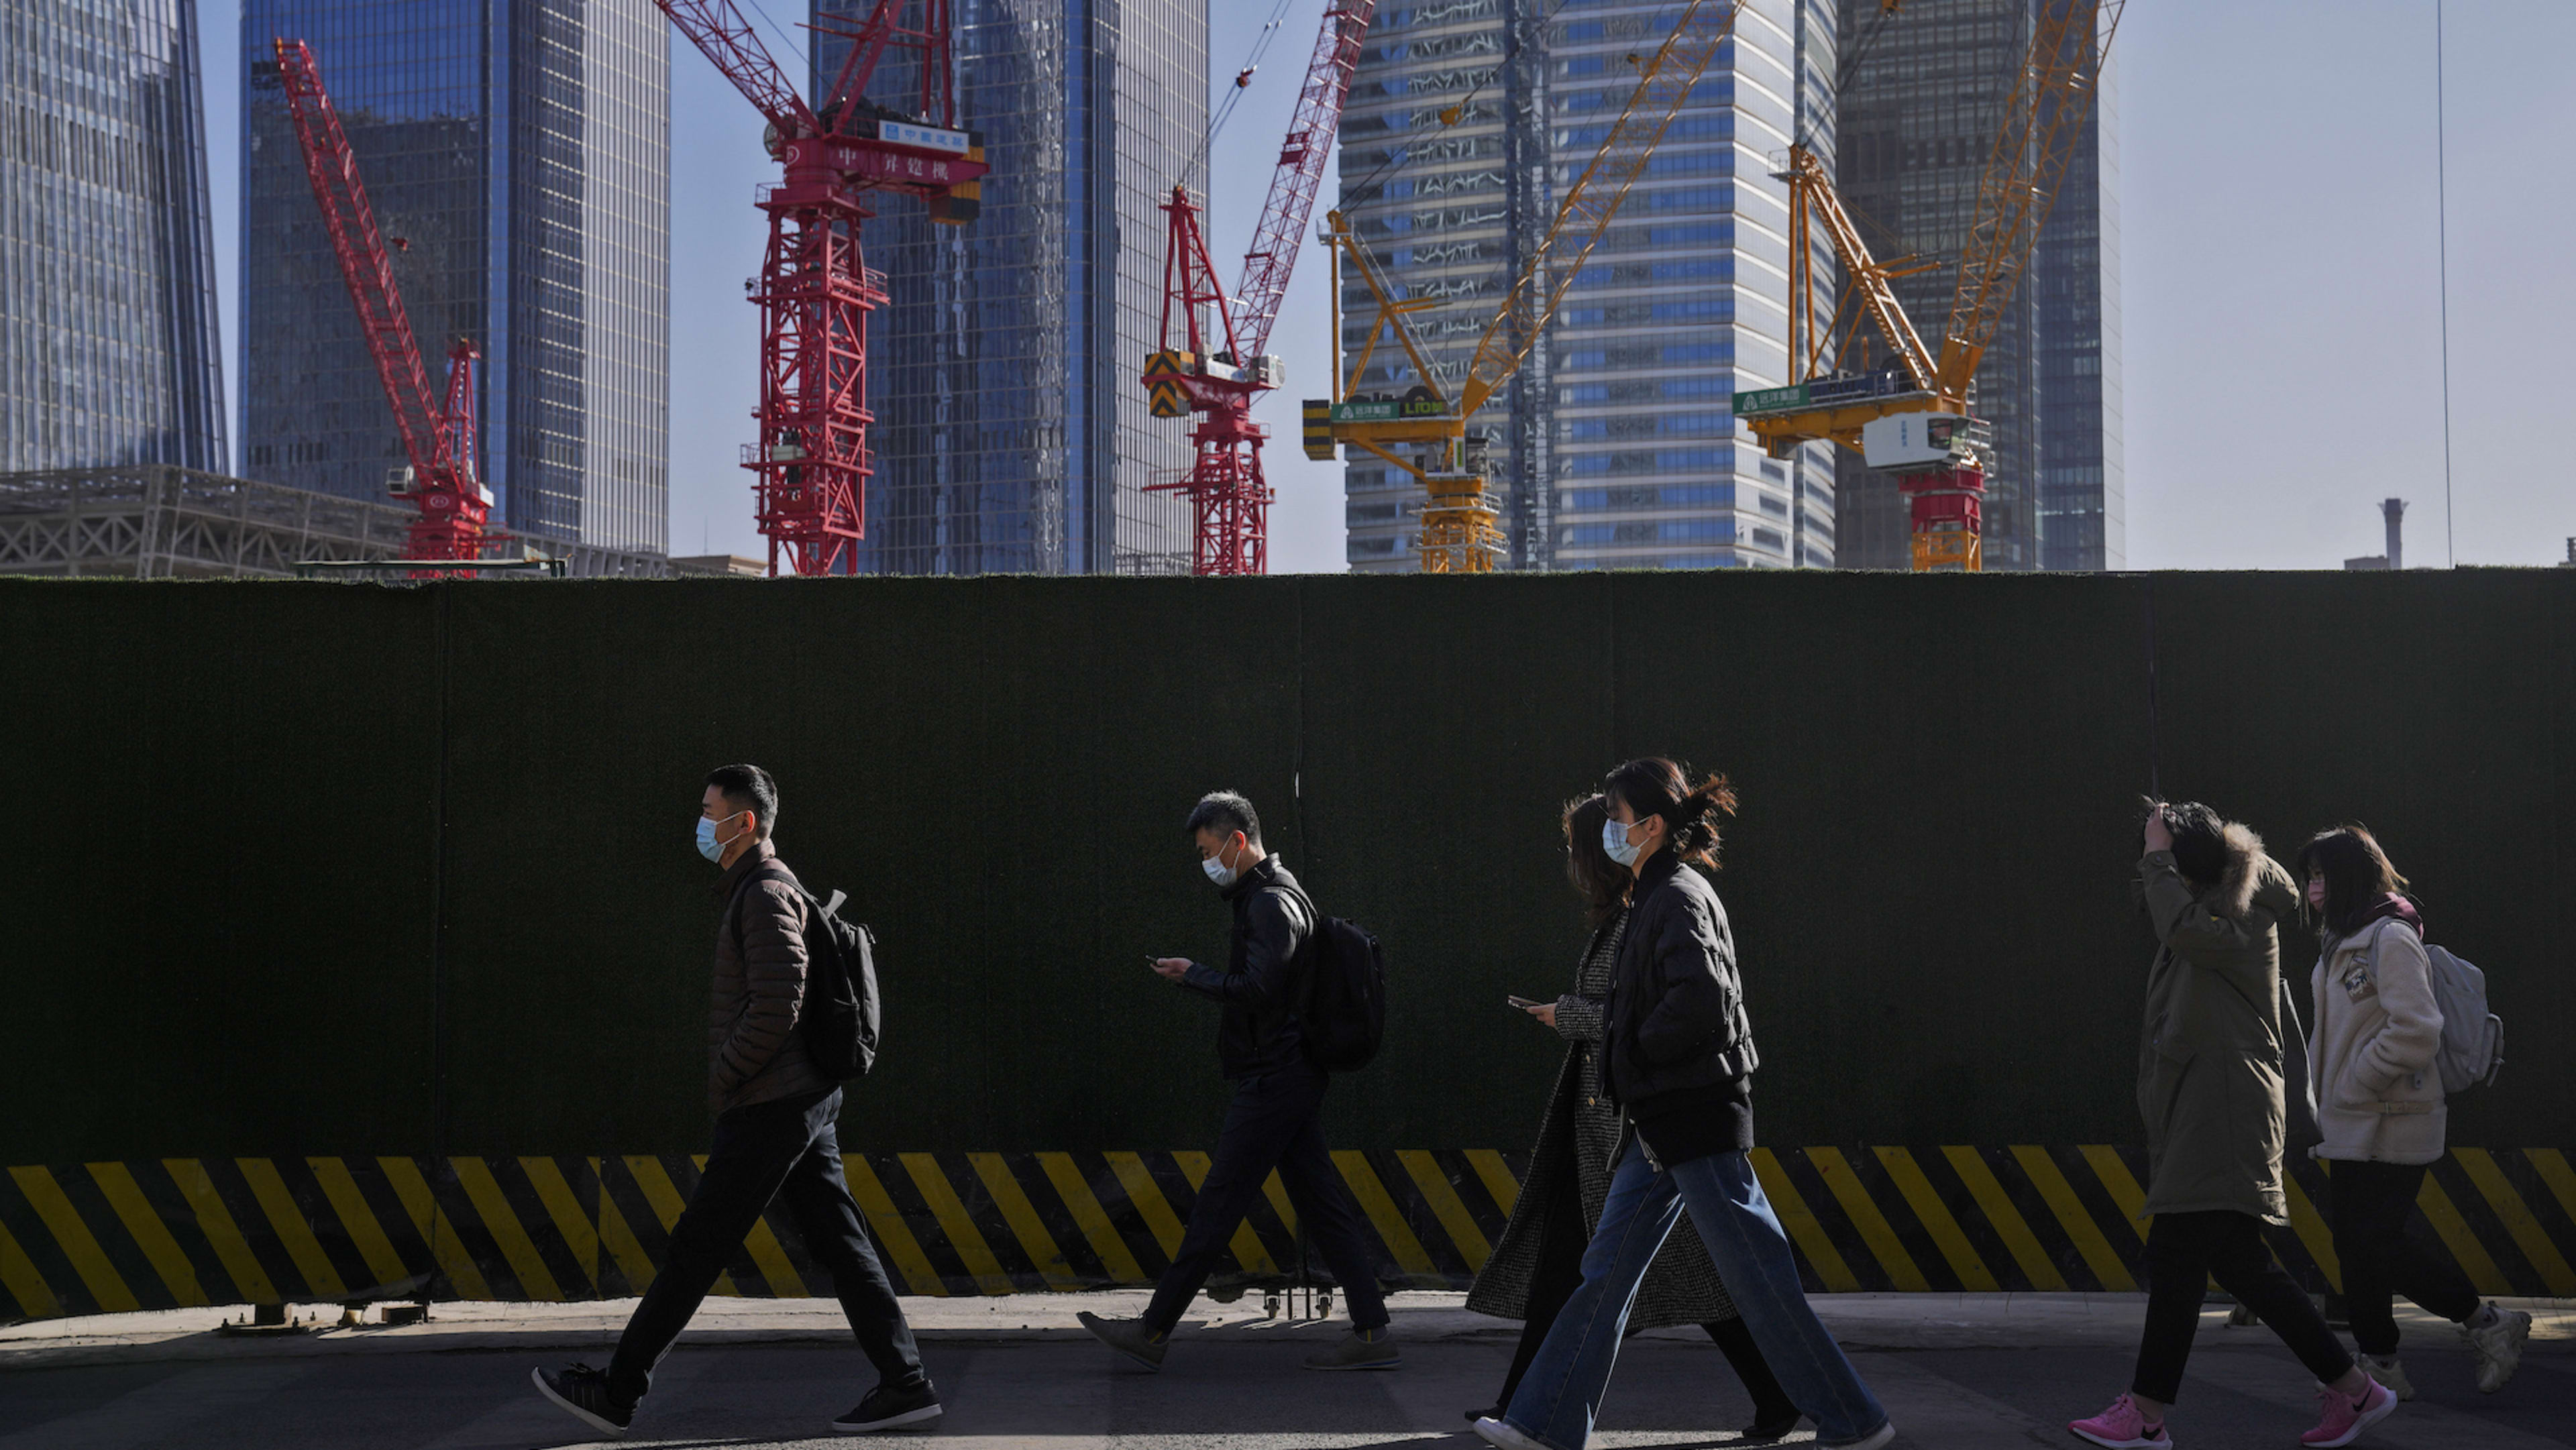 People wearing face masks walk by construction cranes near the office buildings at the central business district in Beijing,